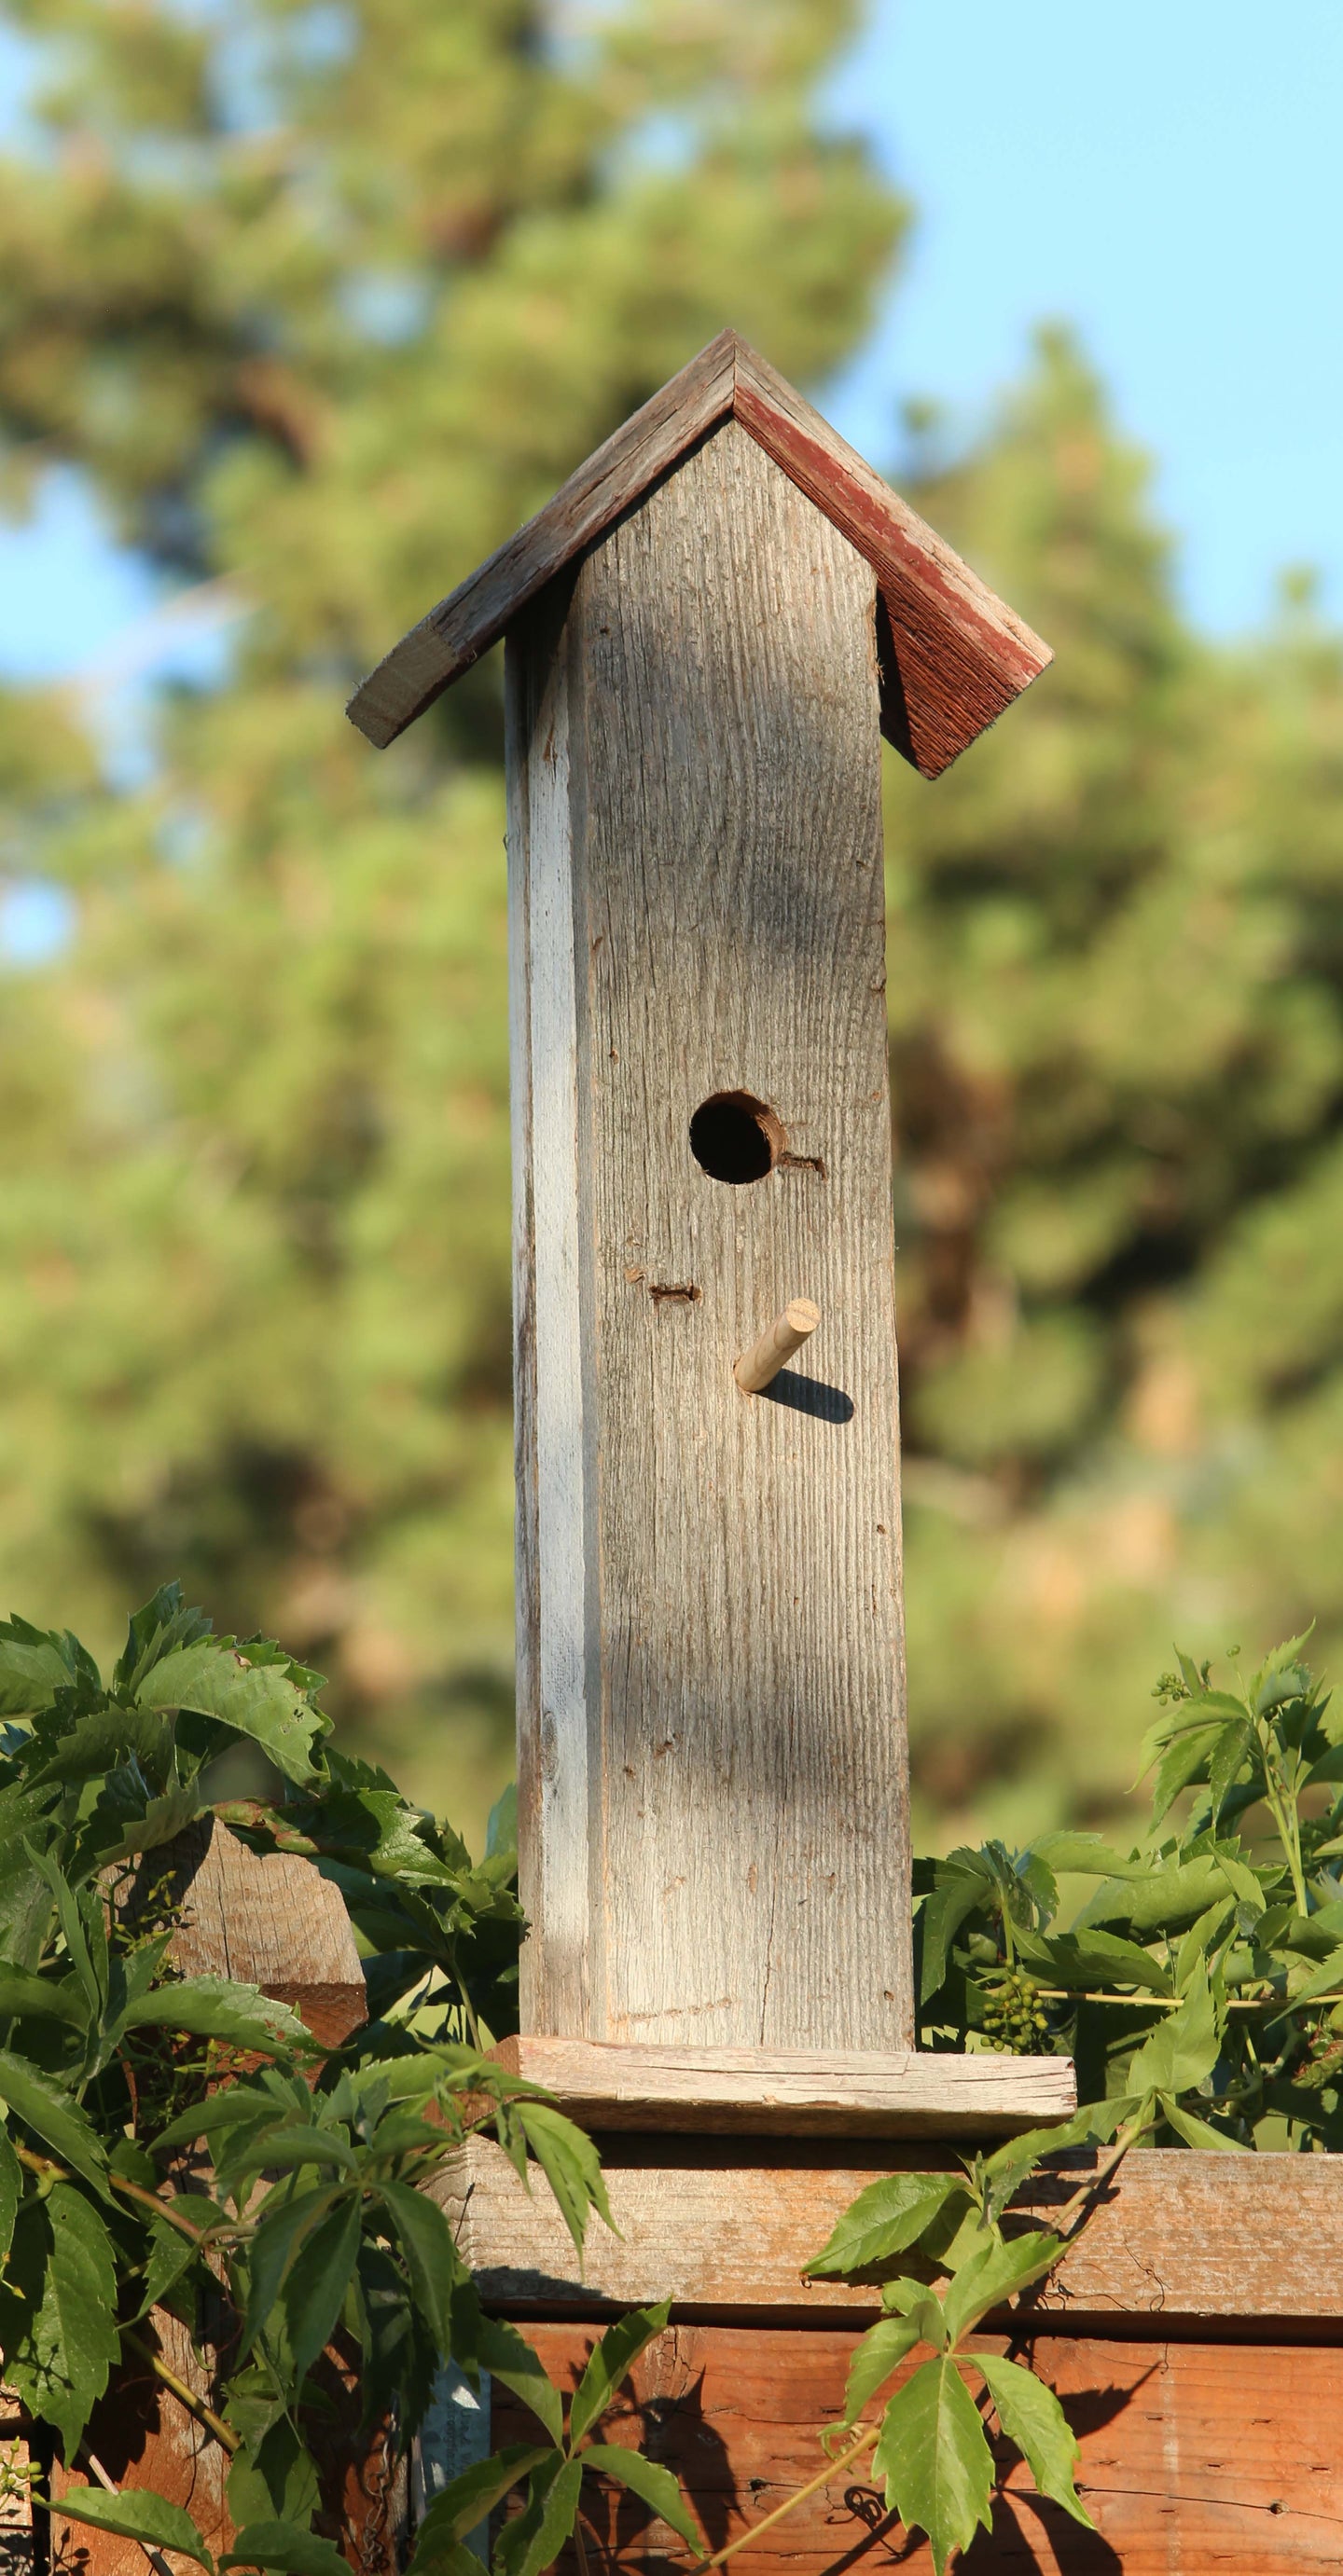 Handcrafted rustic reclaimed barnwood bird house, this birdhouse is made from barn wood